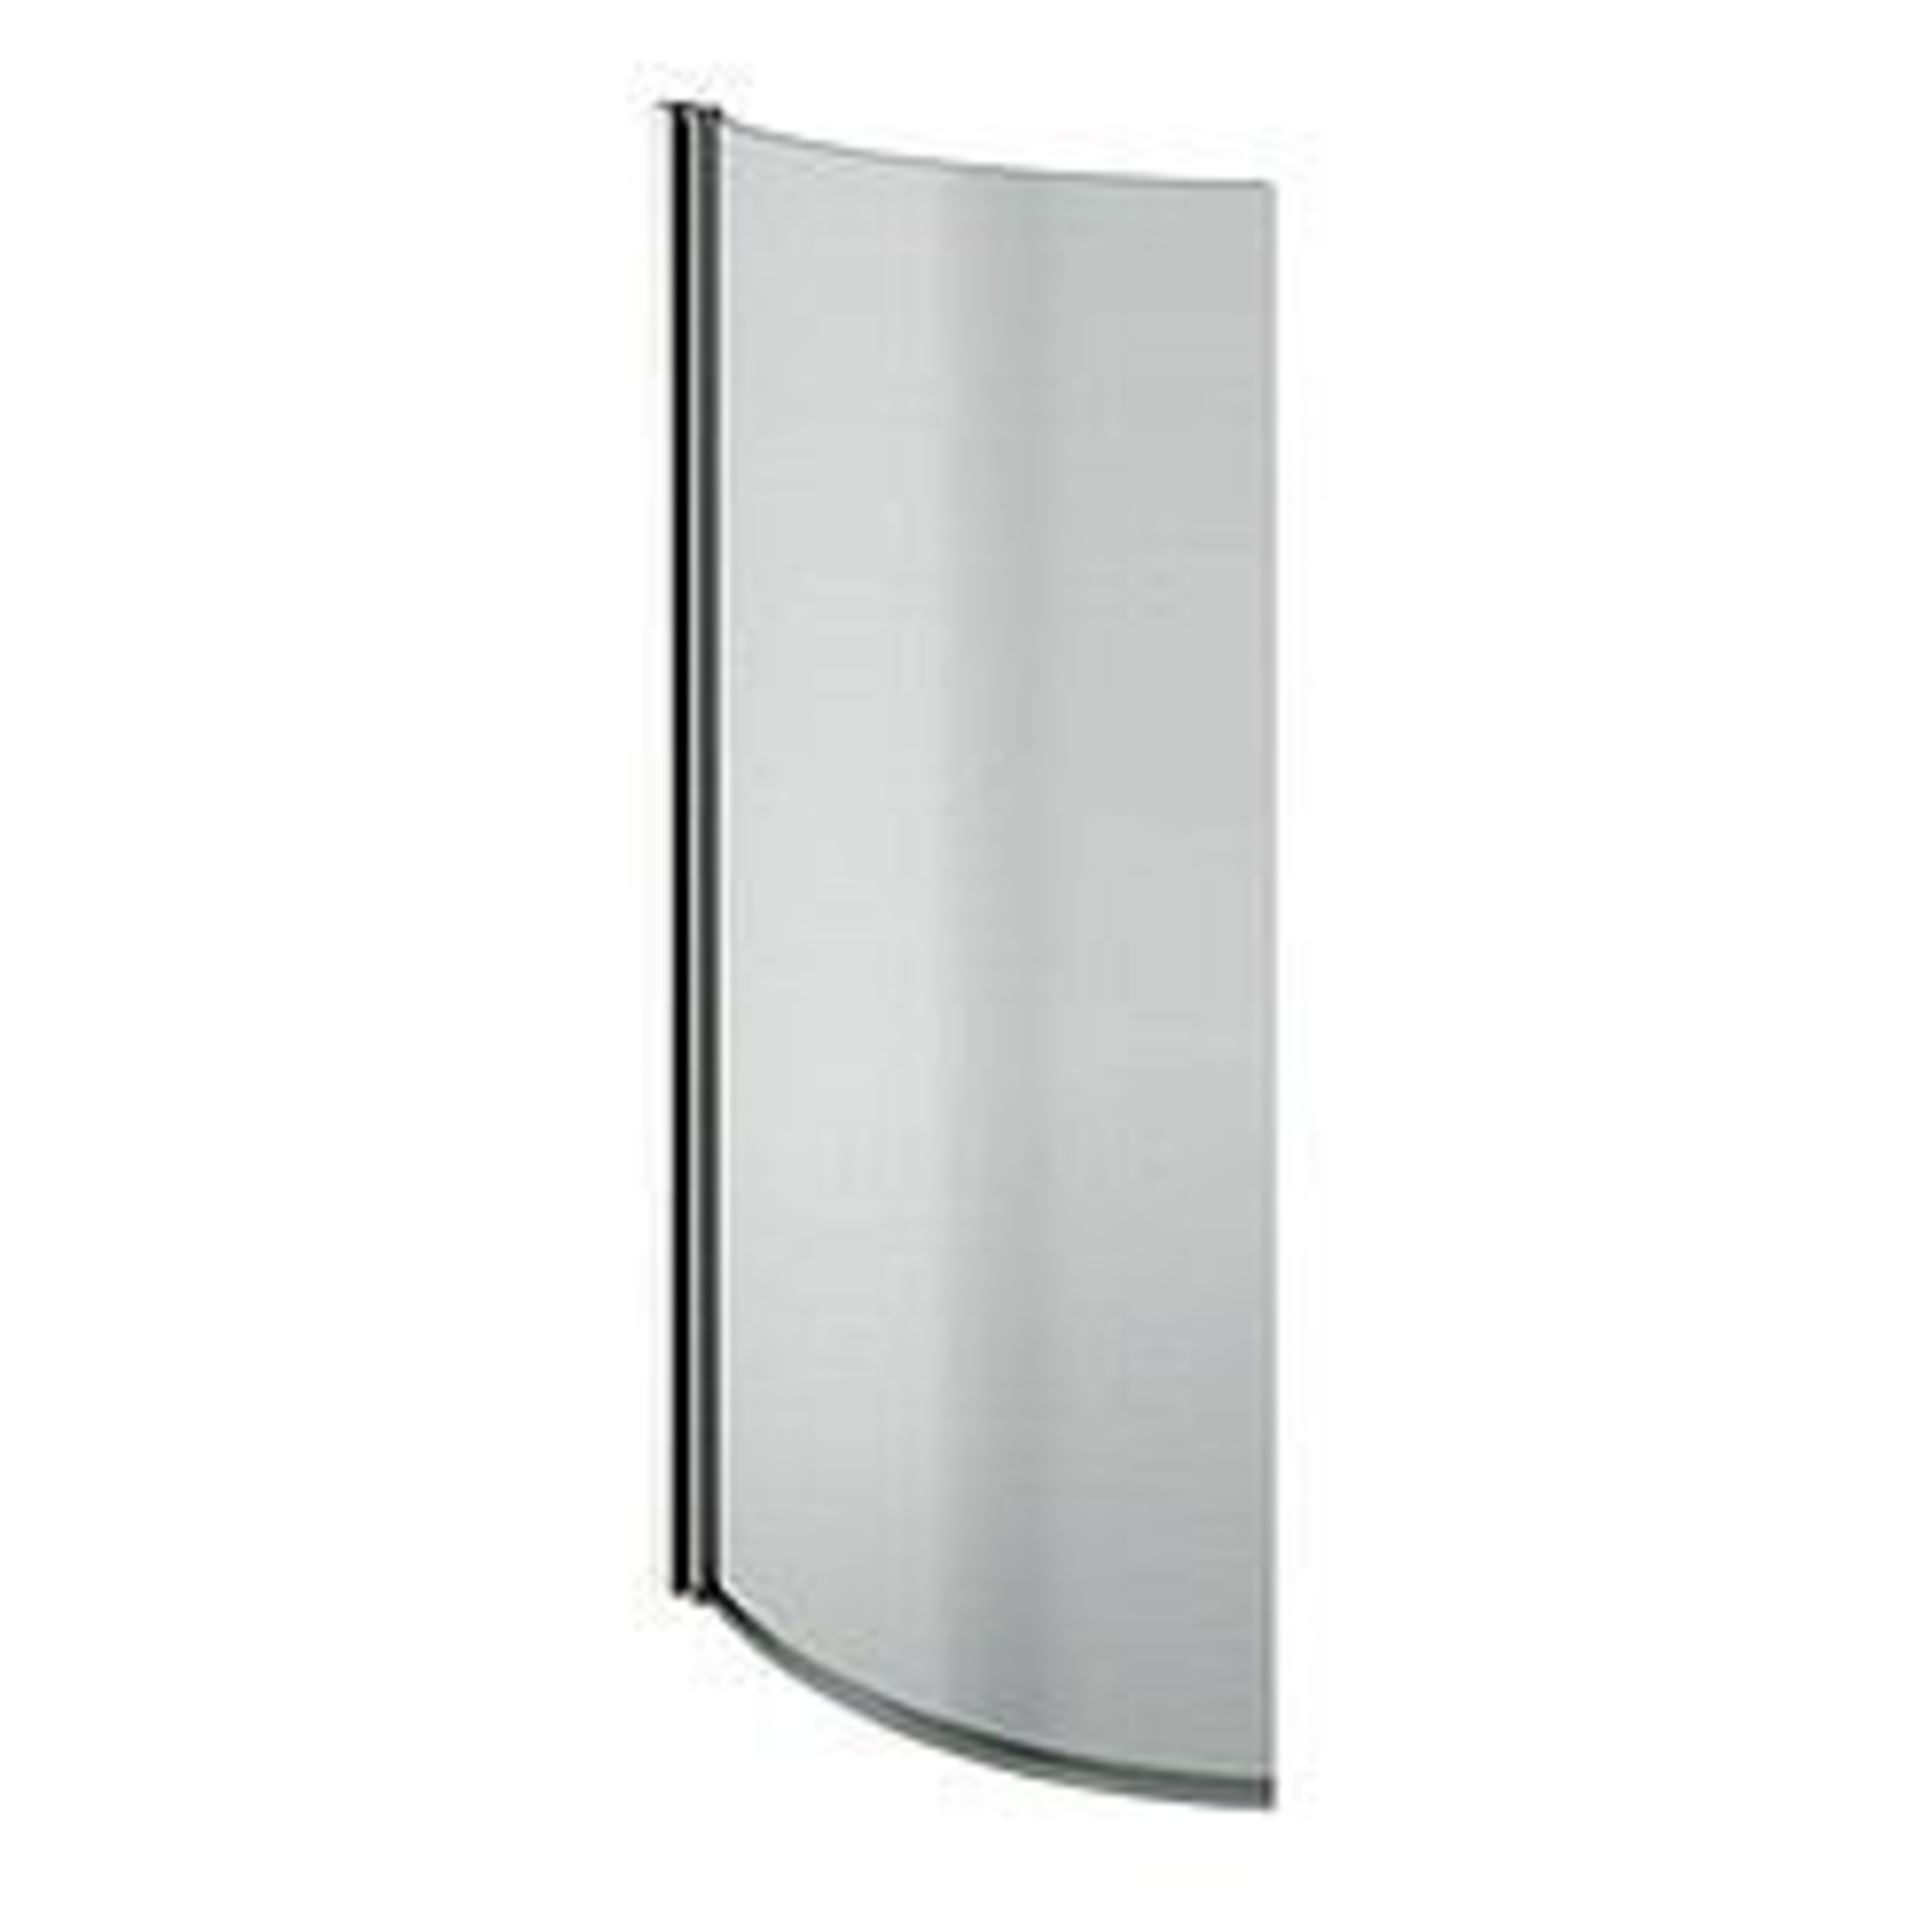 HIGH QUALITY PIVOT CURVED ‘RISE & FALL’ HINGED BATH SHOWER SCREEN FOR ‘P’ SHAPED SHOWER BATHS (BOXED